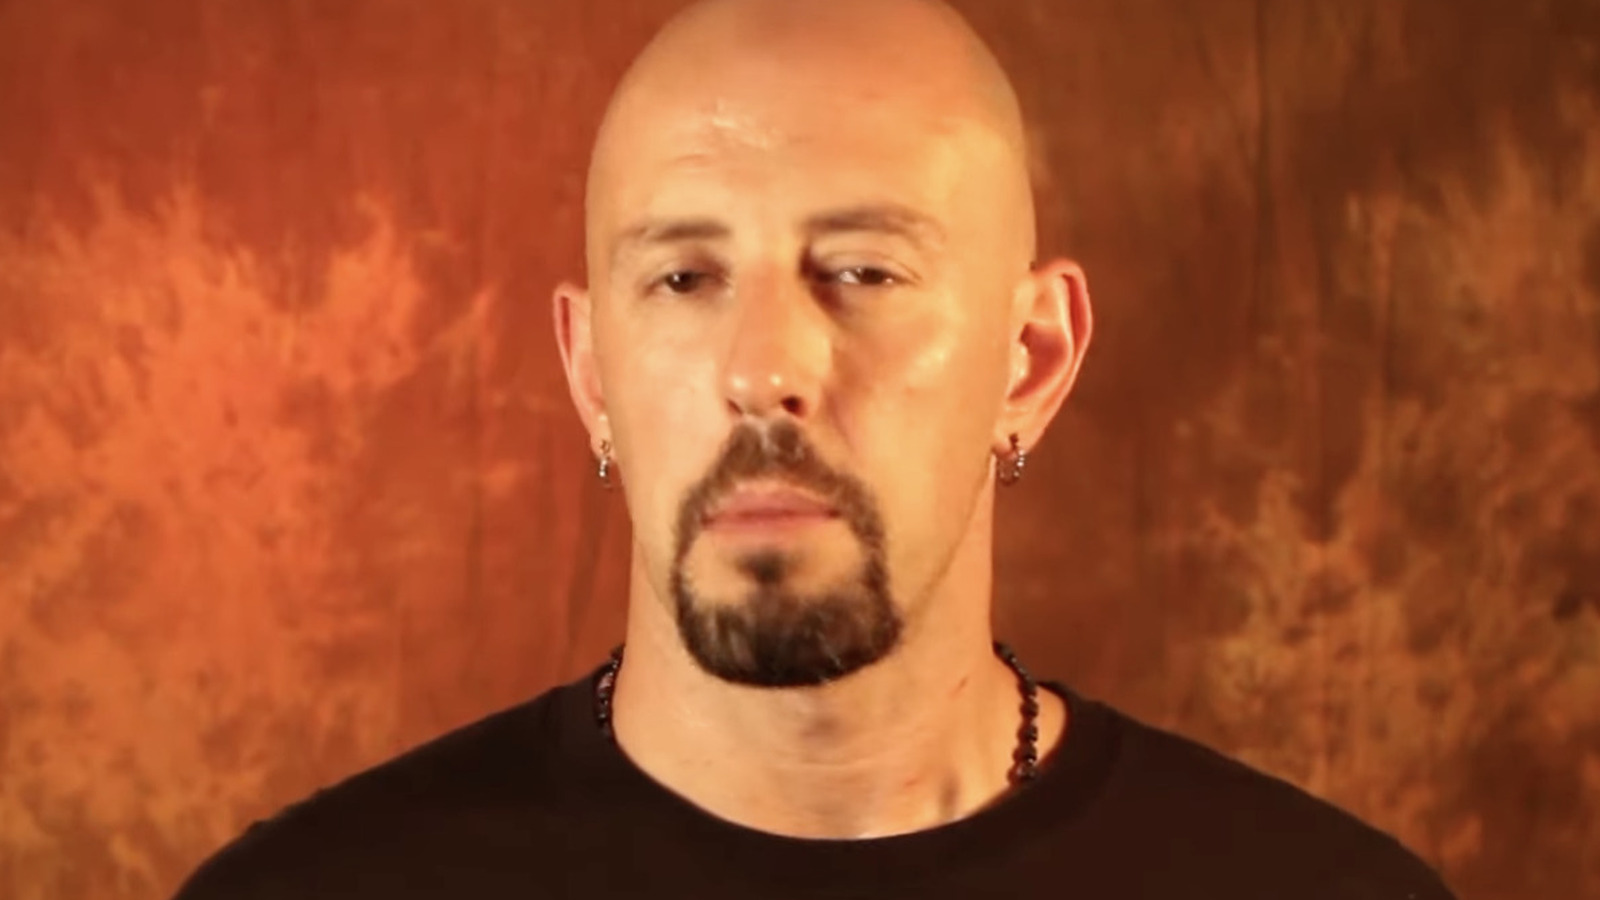 Justin Credible Believes ECW Would Be Alive With The Streaming Options Today